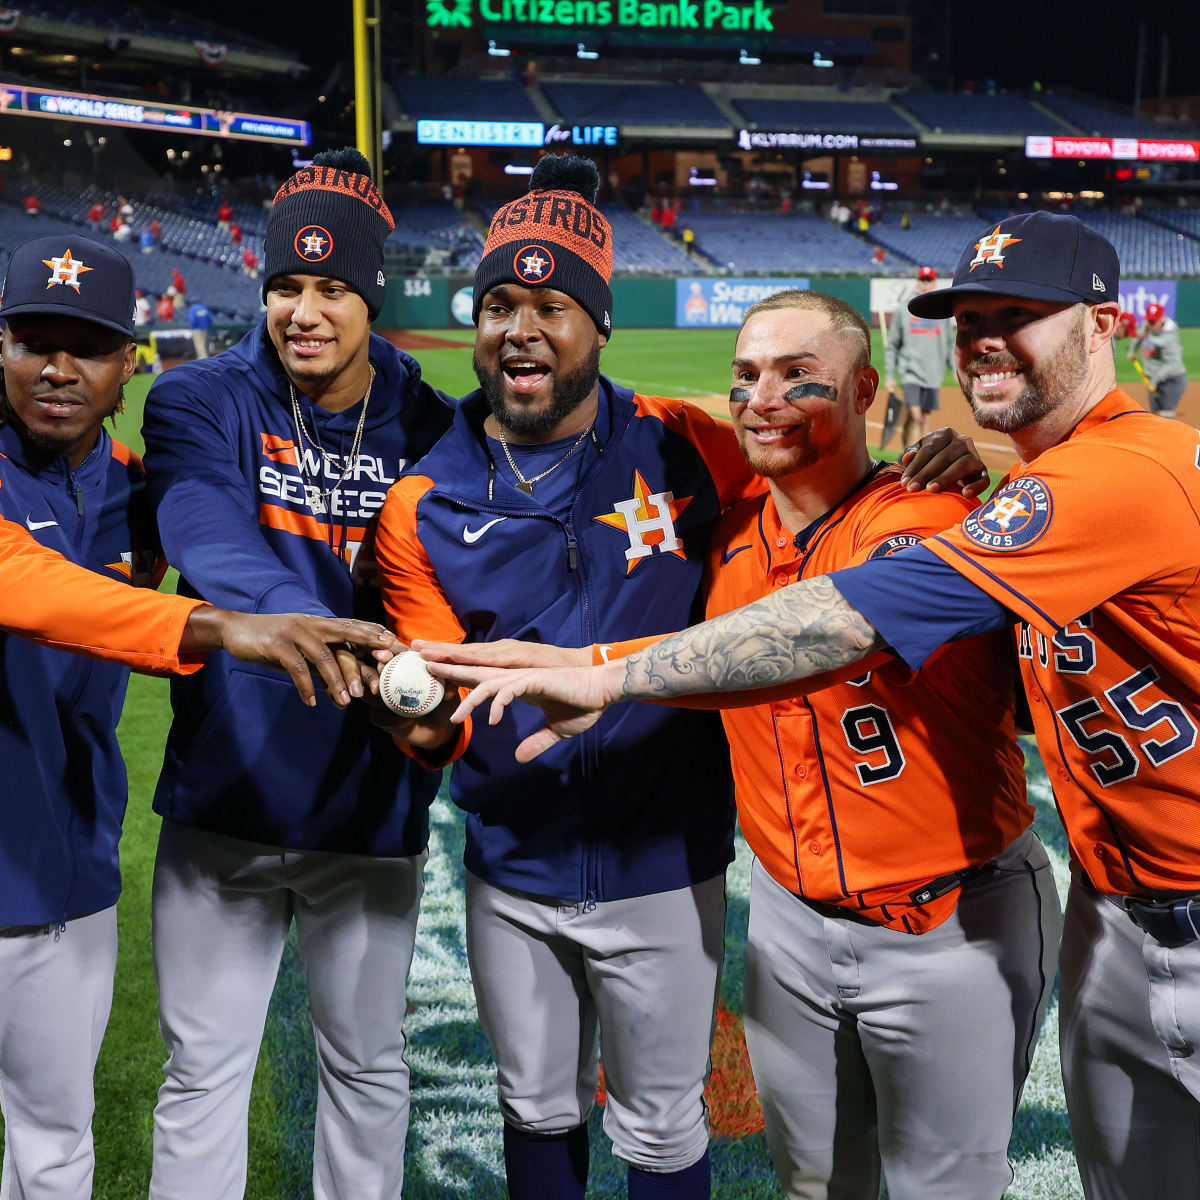 Kyle Tucker puts himself in Astros history books with 2 homers in Game 1 of  World Series